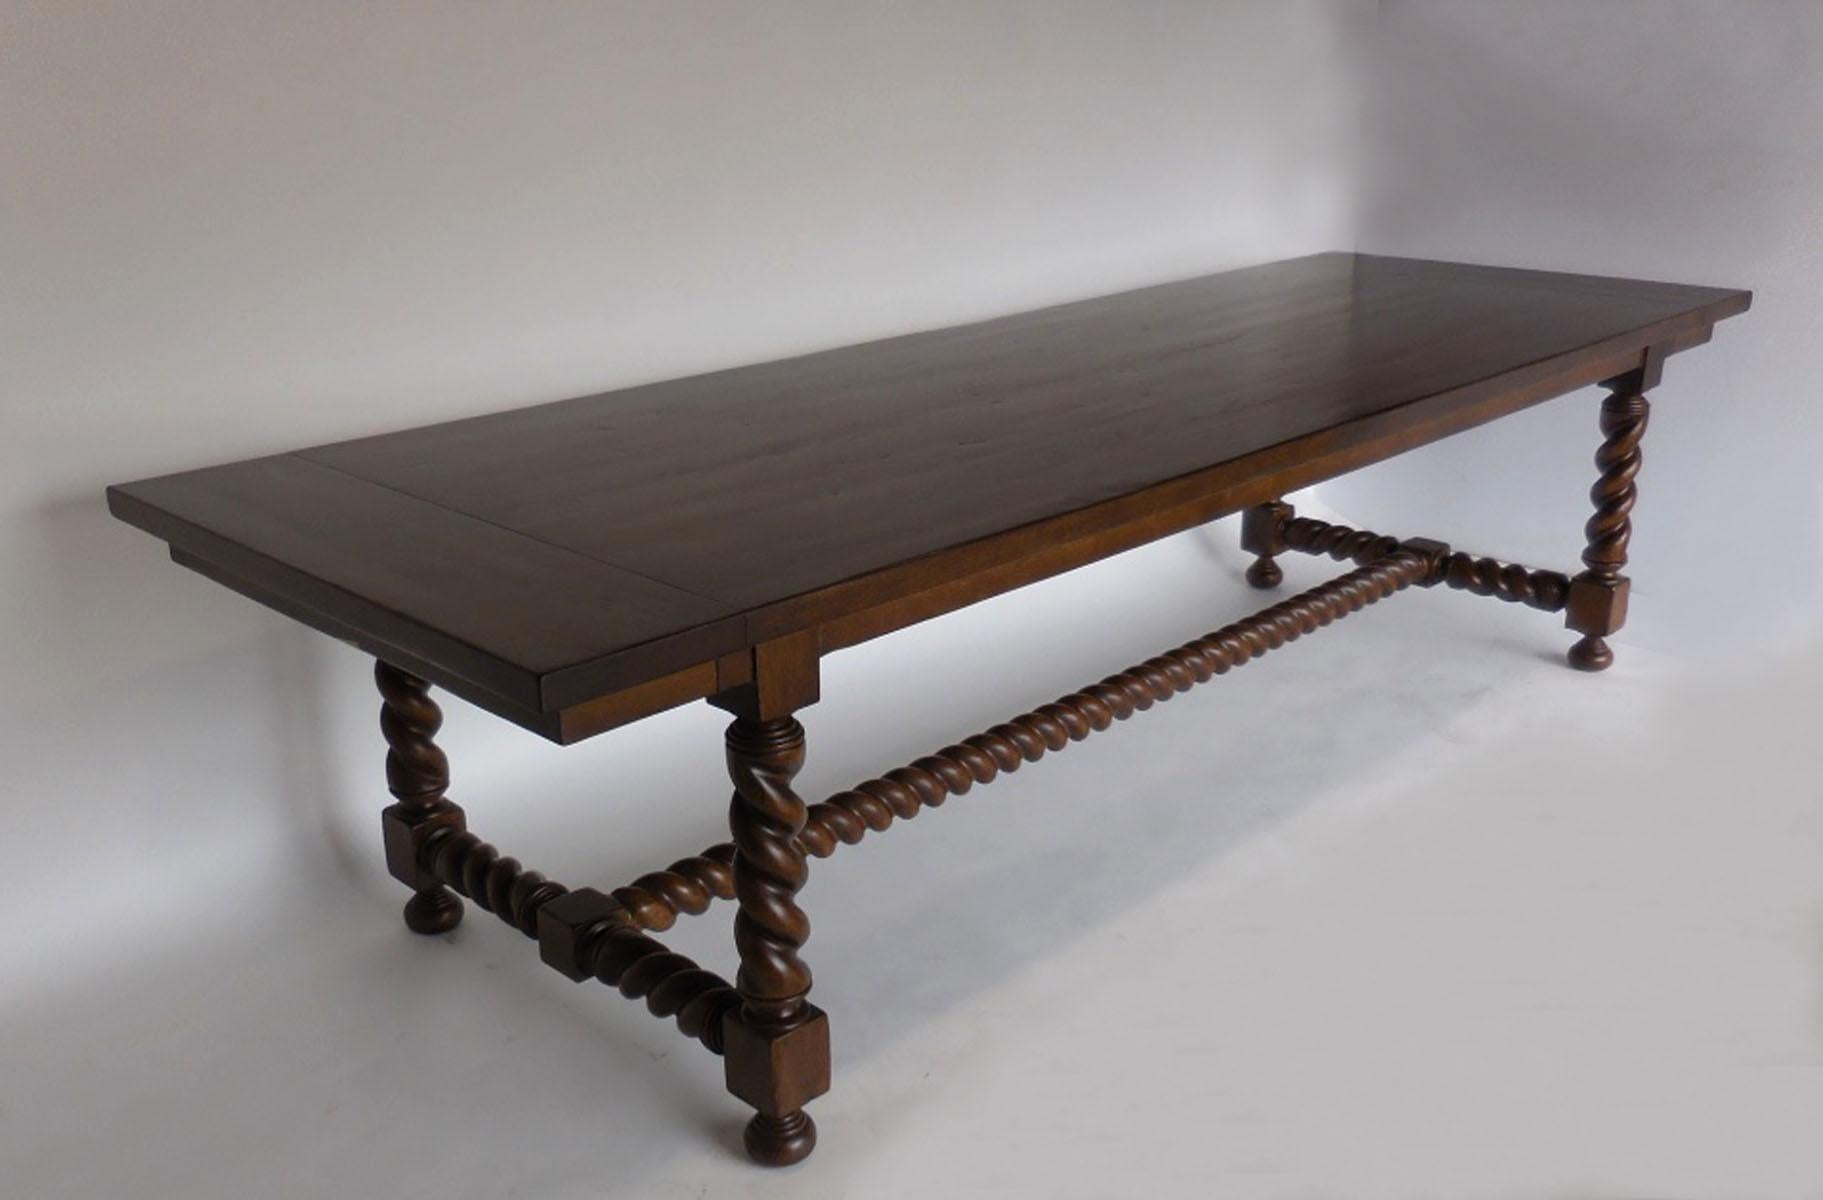 Spanish Colonial Custom Large Scale Barley Twist Dining Table with Leaves by Dos Gallos Studio For Sale